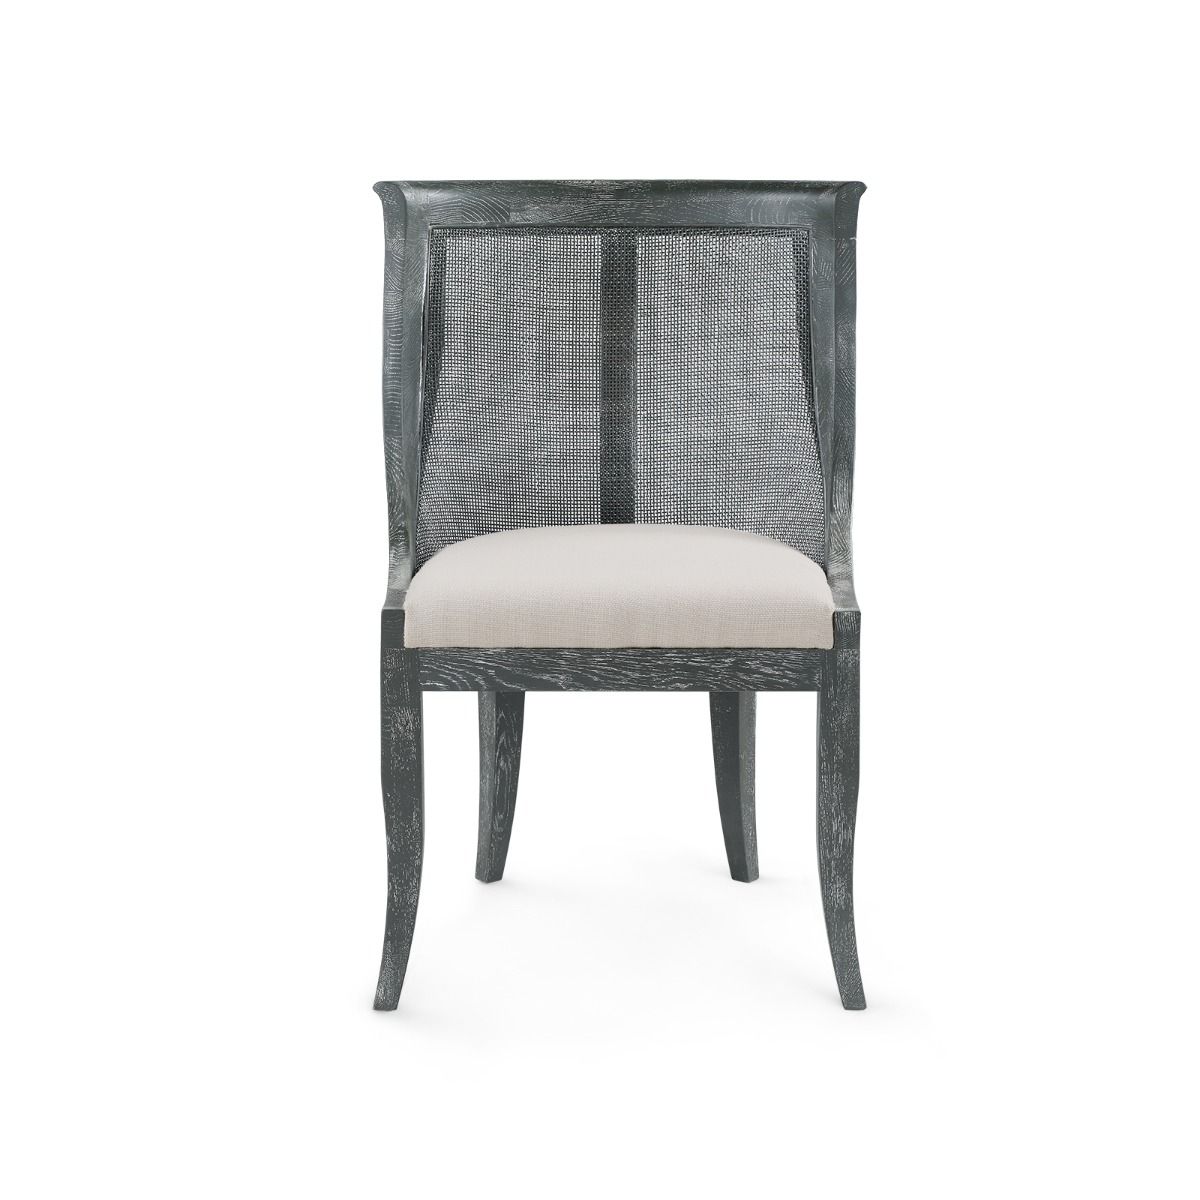 Bungalow 5 Monaco Arm Chair Gray MON-555-96 chair, chairs, office chair, accent chair, dining room chair, dining room chairs, dining chairs, dining chair, office chair, desk chair, desk chairs, accent chairs, living room chair, living room chairs, vanity chair, vanity chairs, contemporary chair, contemporary chairs